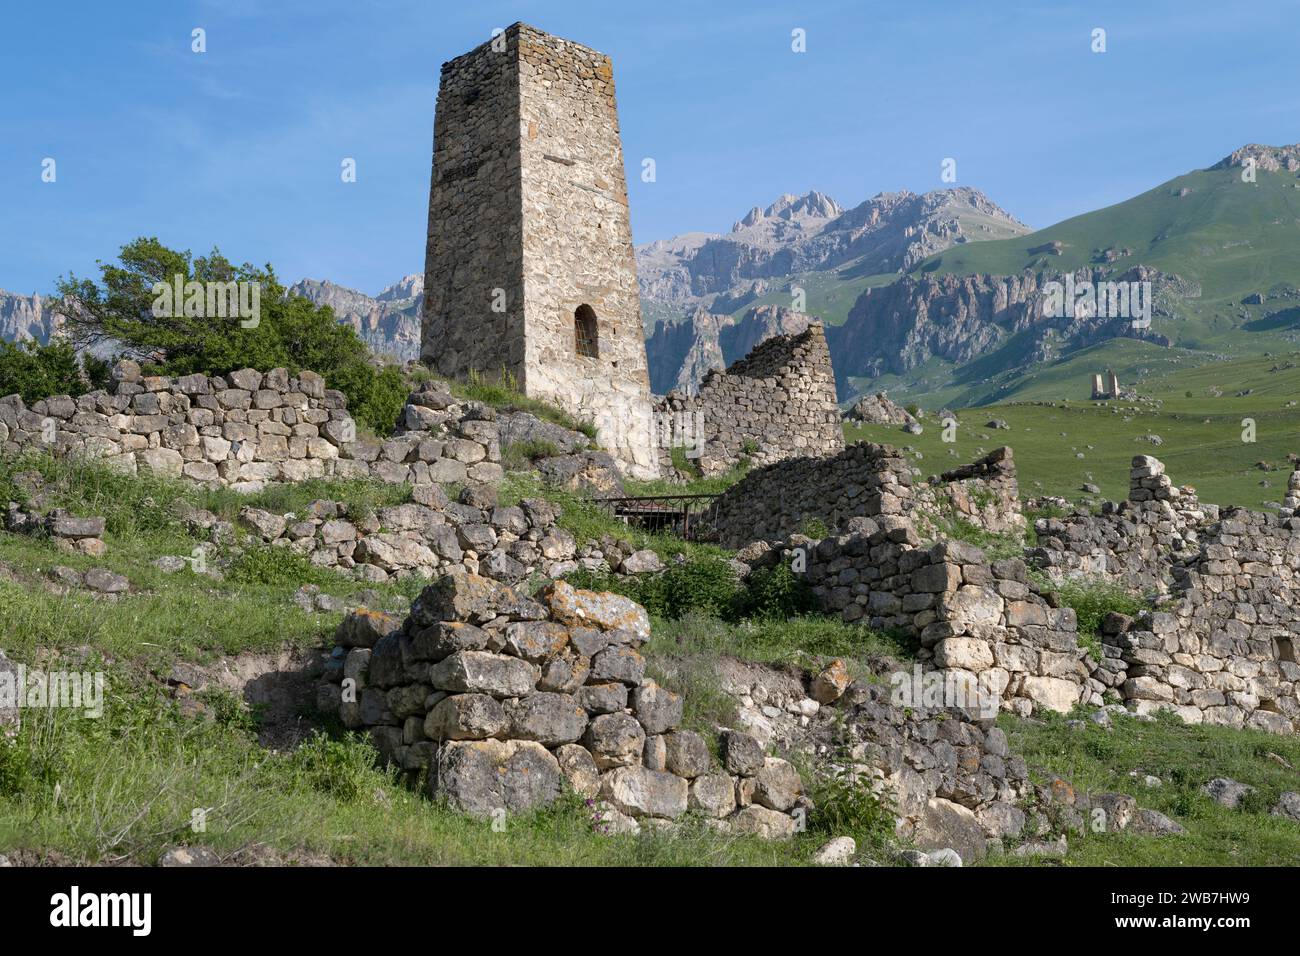 Ancient defensive tower in the North Caucasus mountains on a sunny June morning. Tsmiti, North Ossetia-Alania, Russian Federation Stock Photo